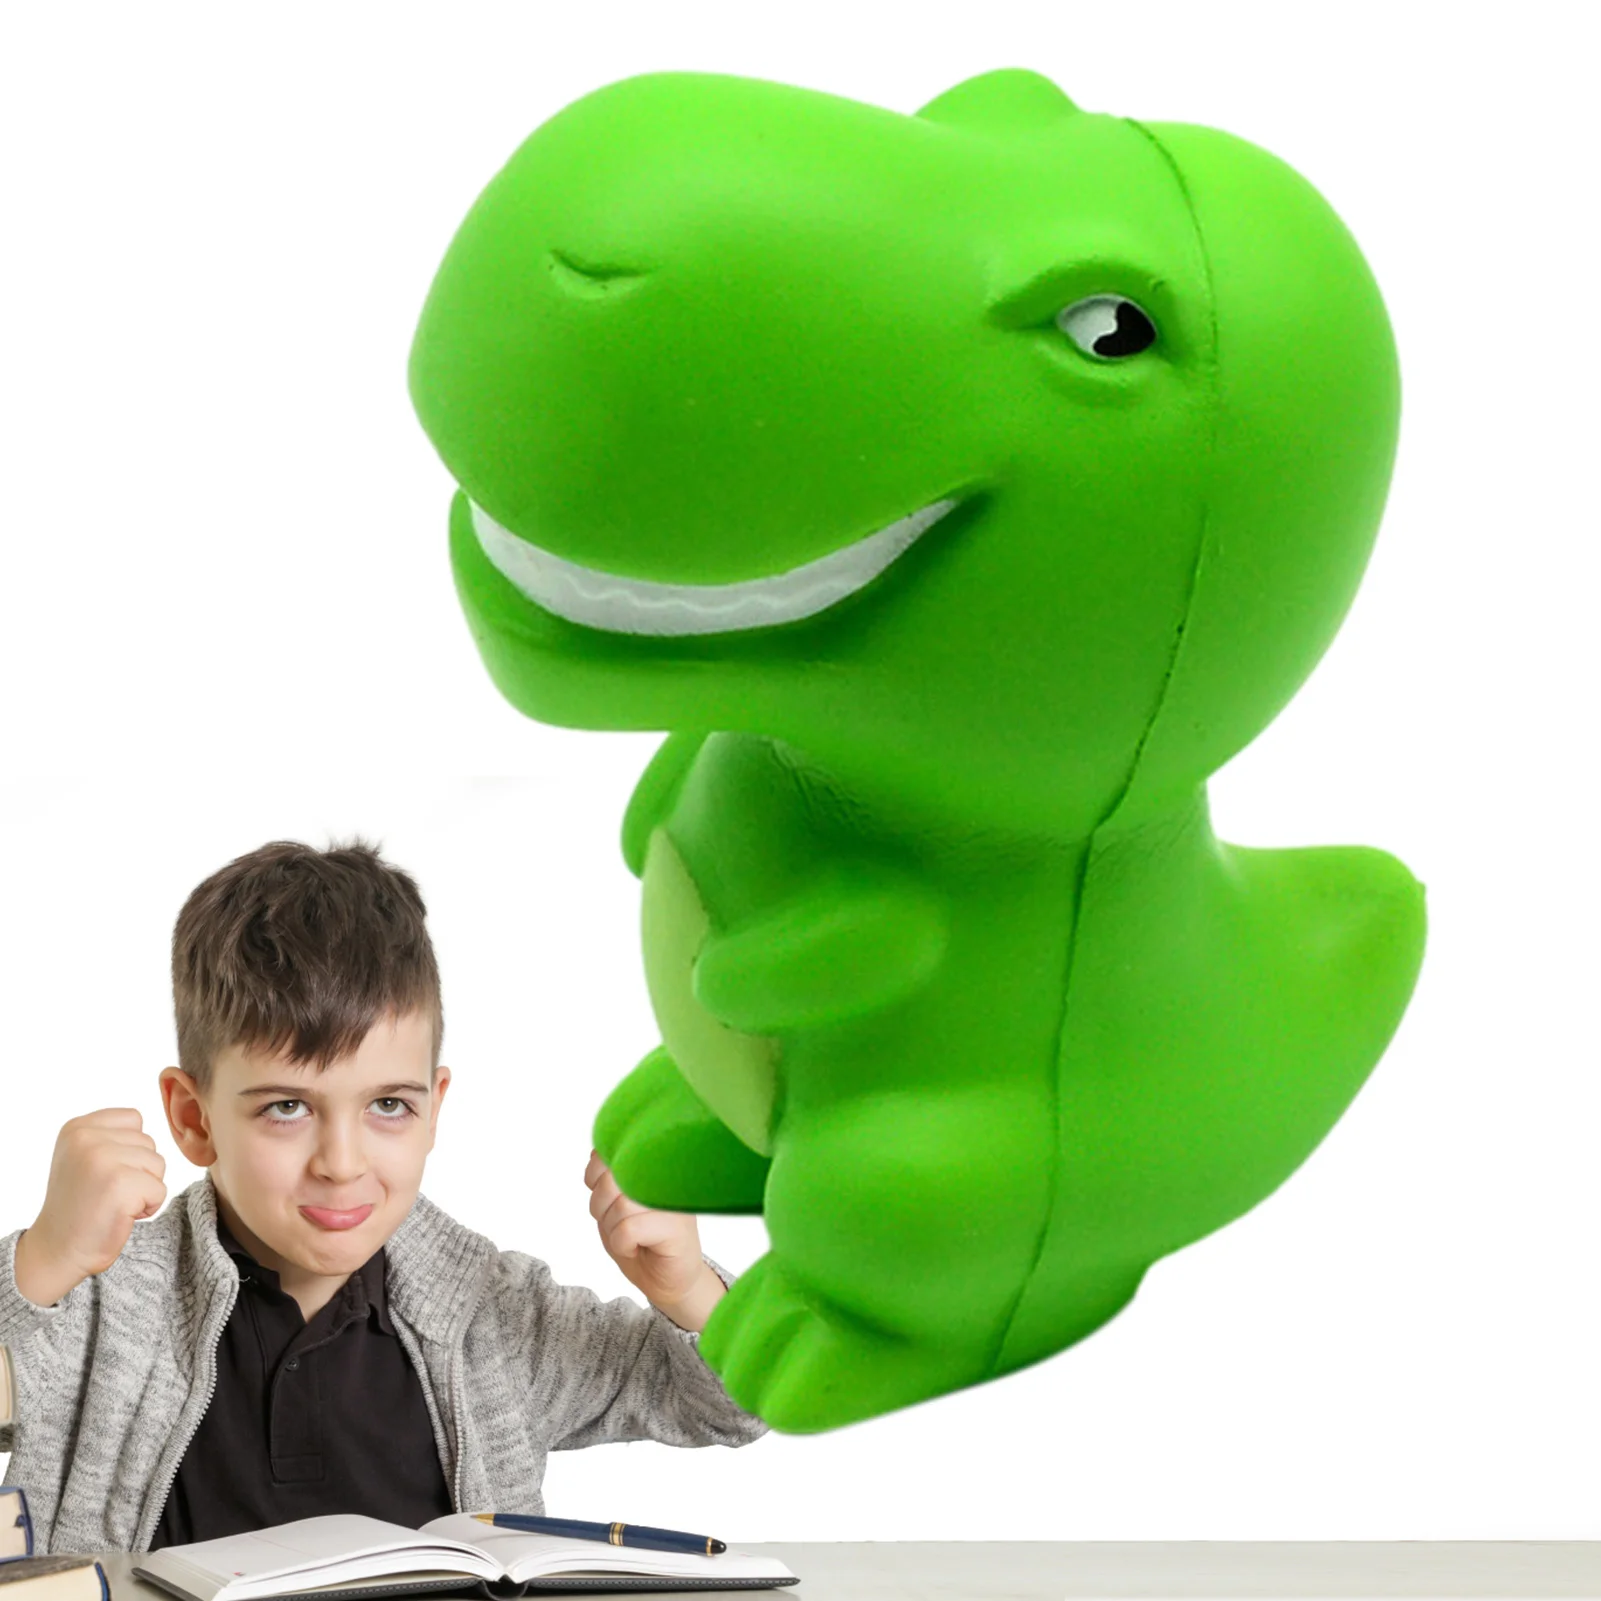 

Dinosaur Stress Relief Toys Anxiety Reliefs Squeezing Dino Toys For Boys Girls Adults Anxiety Reducer Sensory Play Toys For Kids